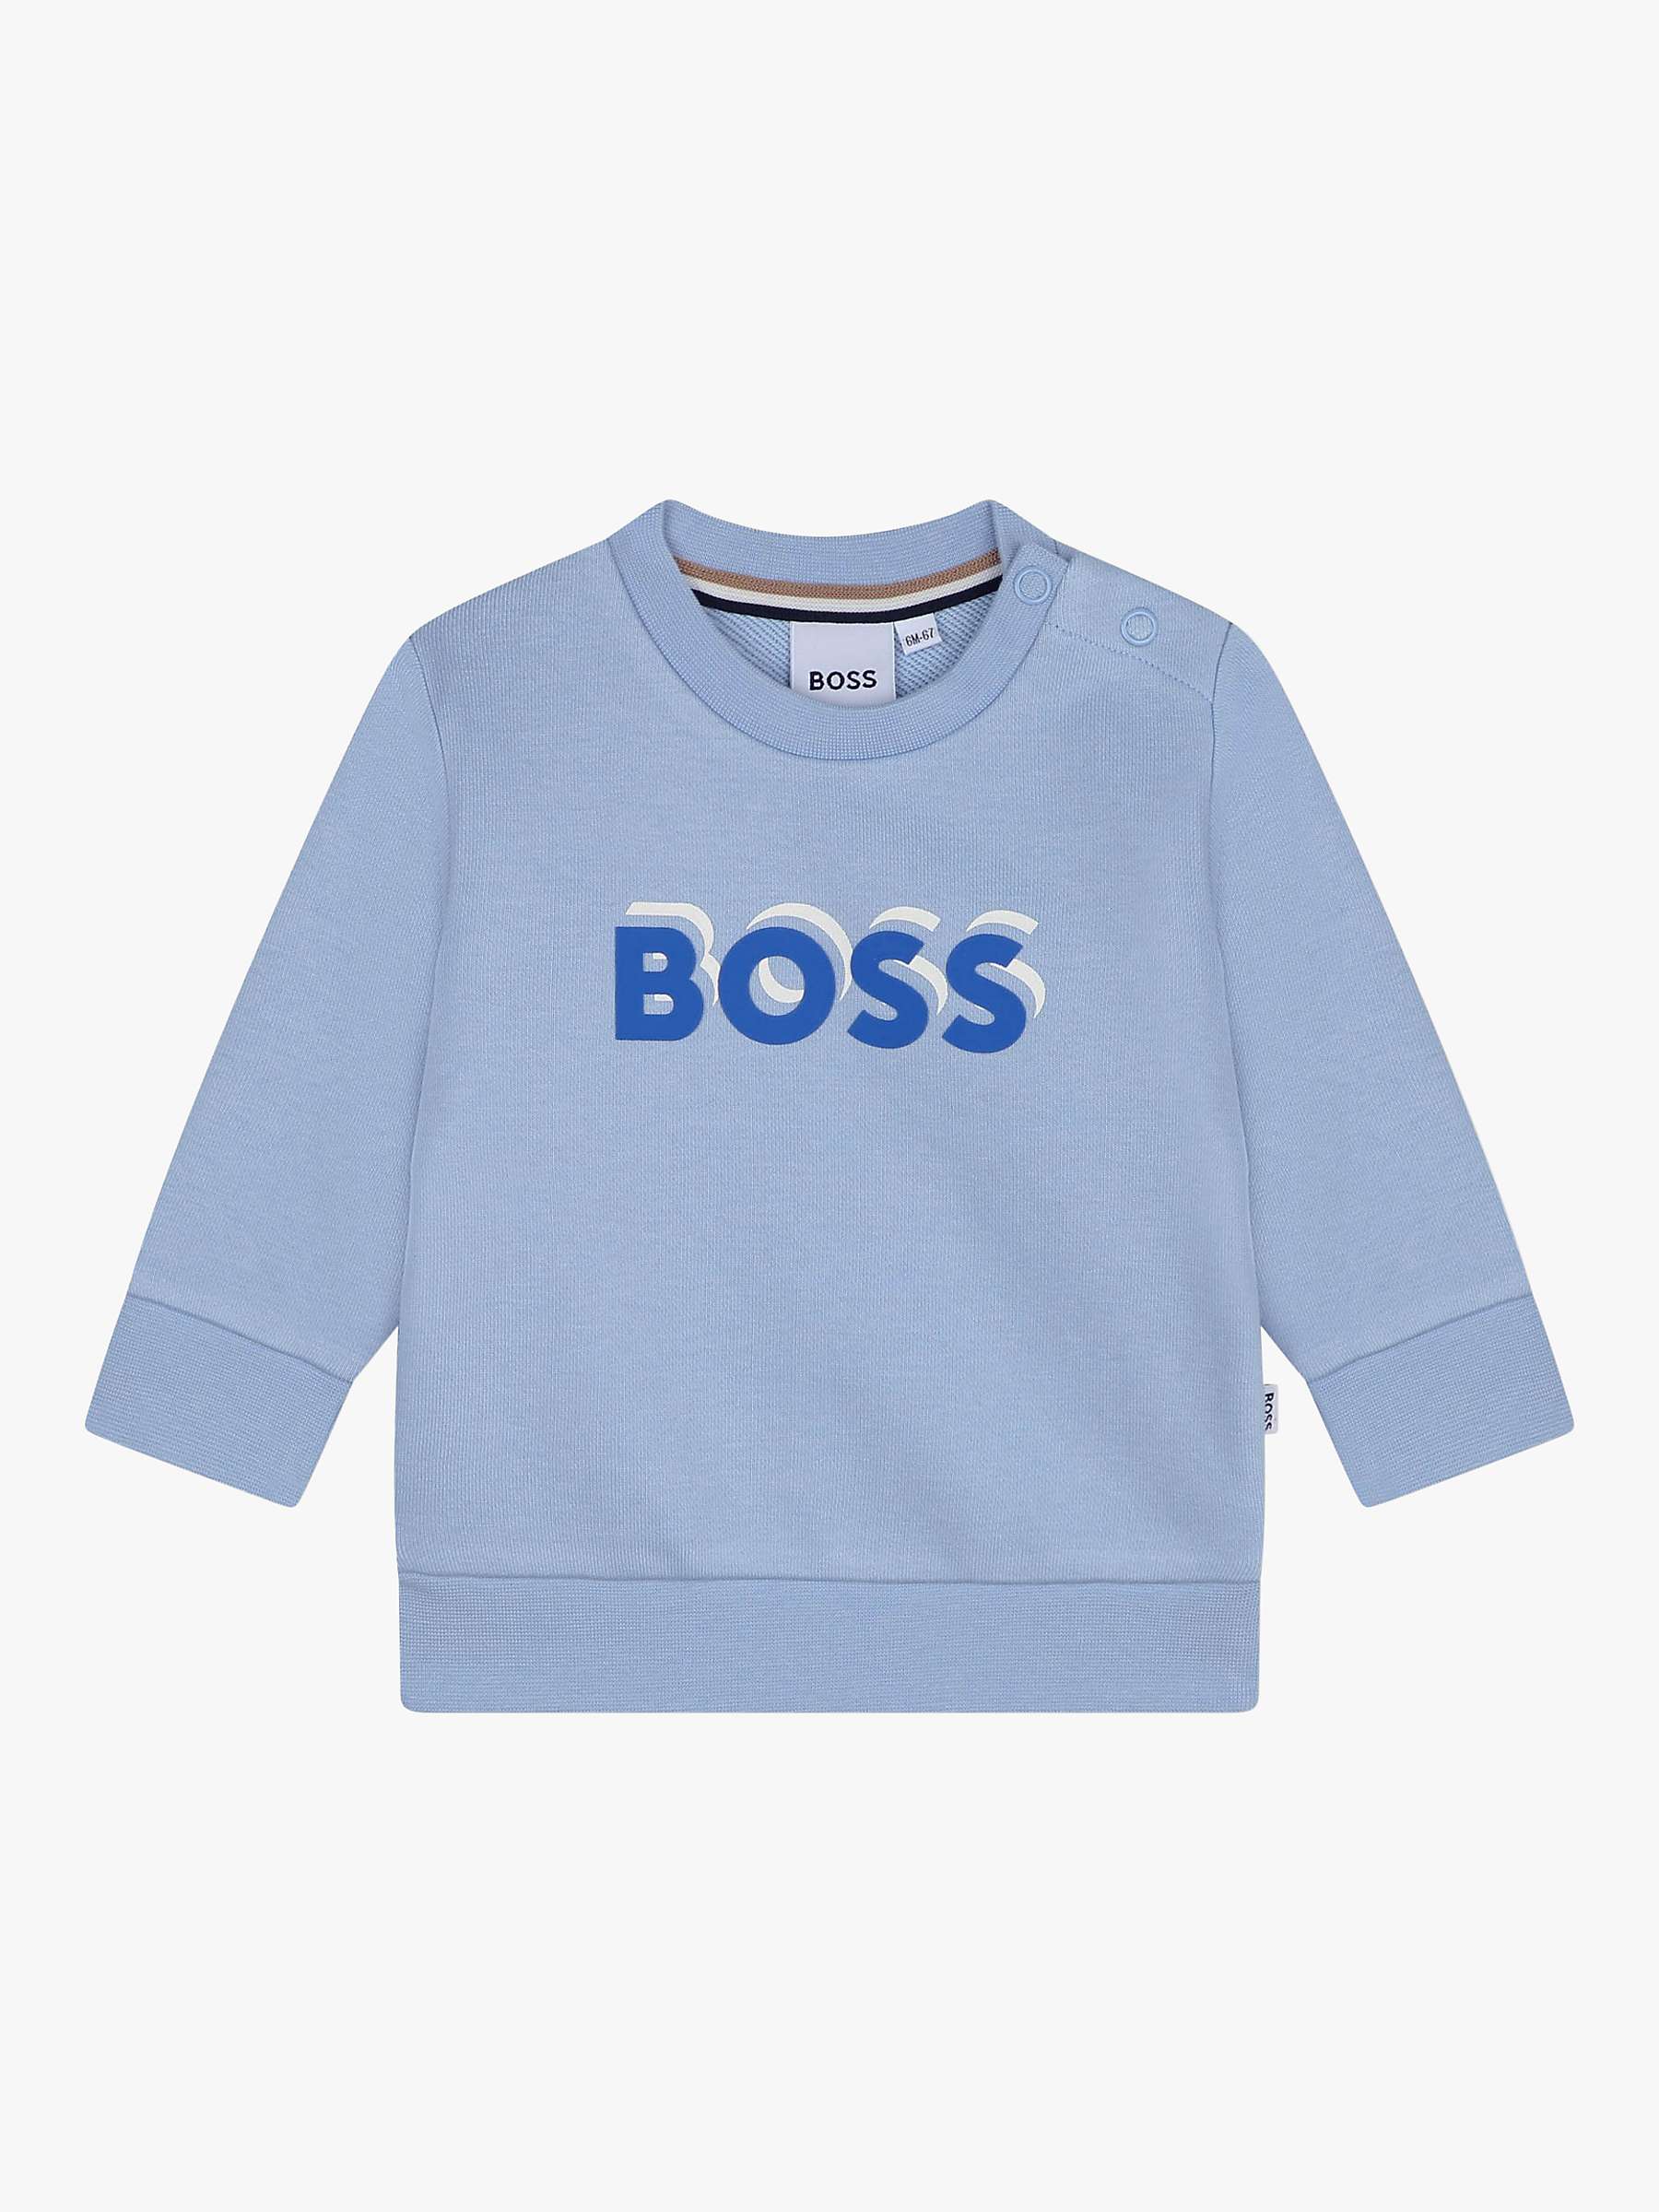 Buy BOSS Baby French Terry Jumper, Blue Online at johnlewis.com